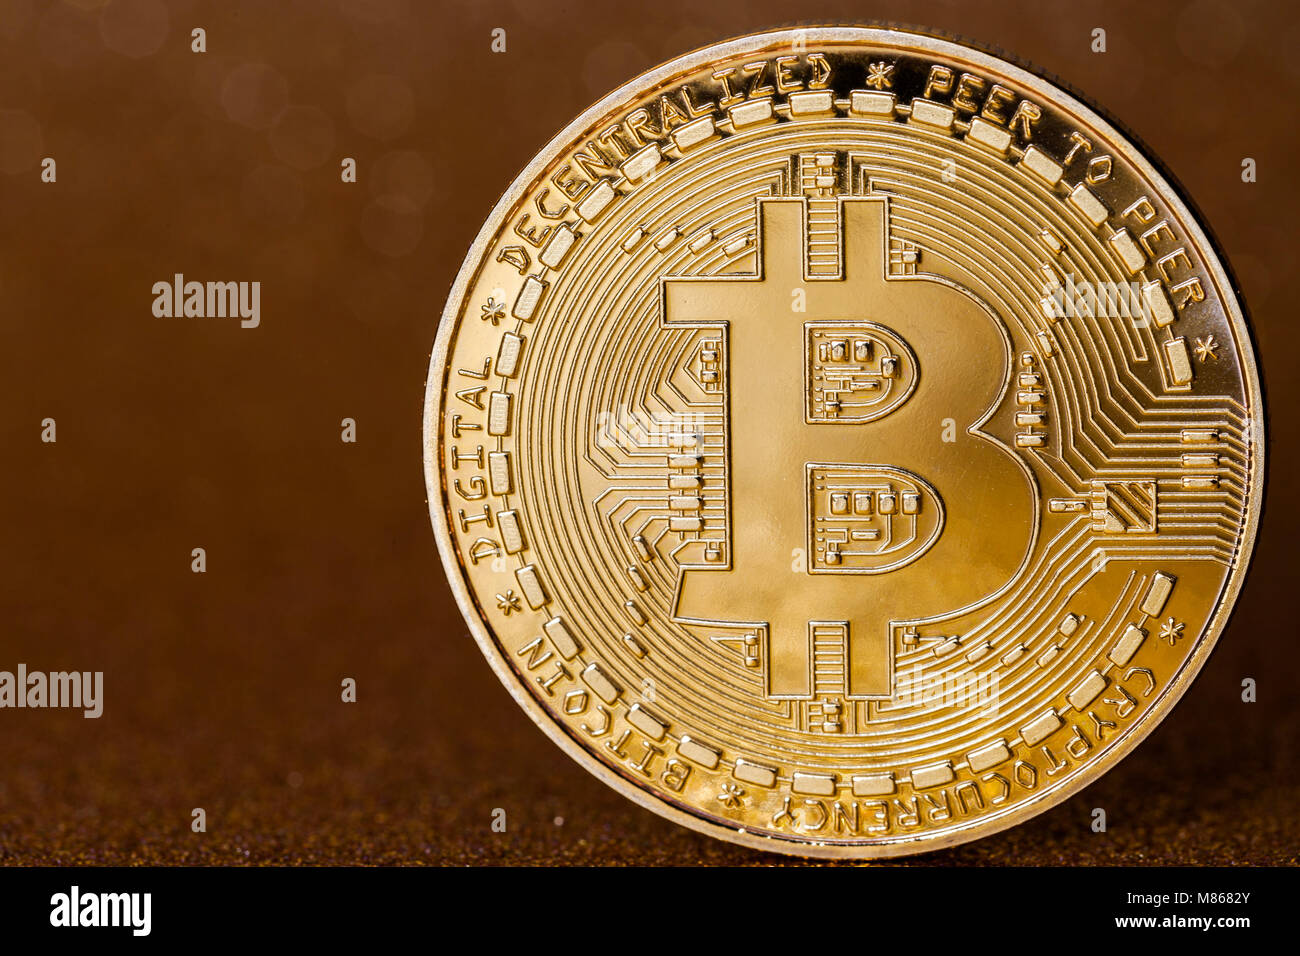 Golden bitcoin cryptocurrency on brown background Stock Photo